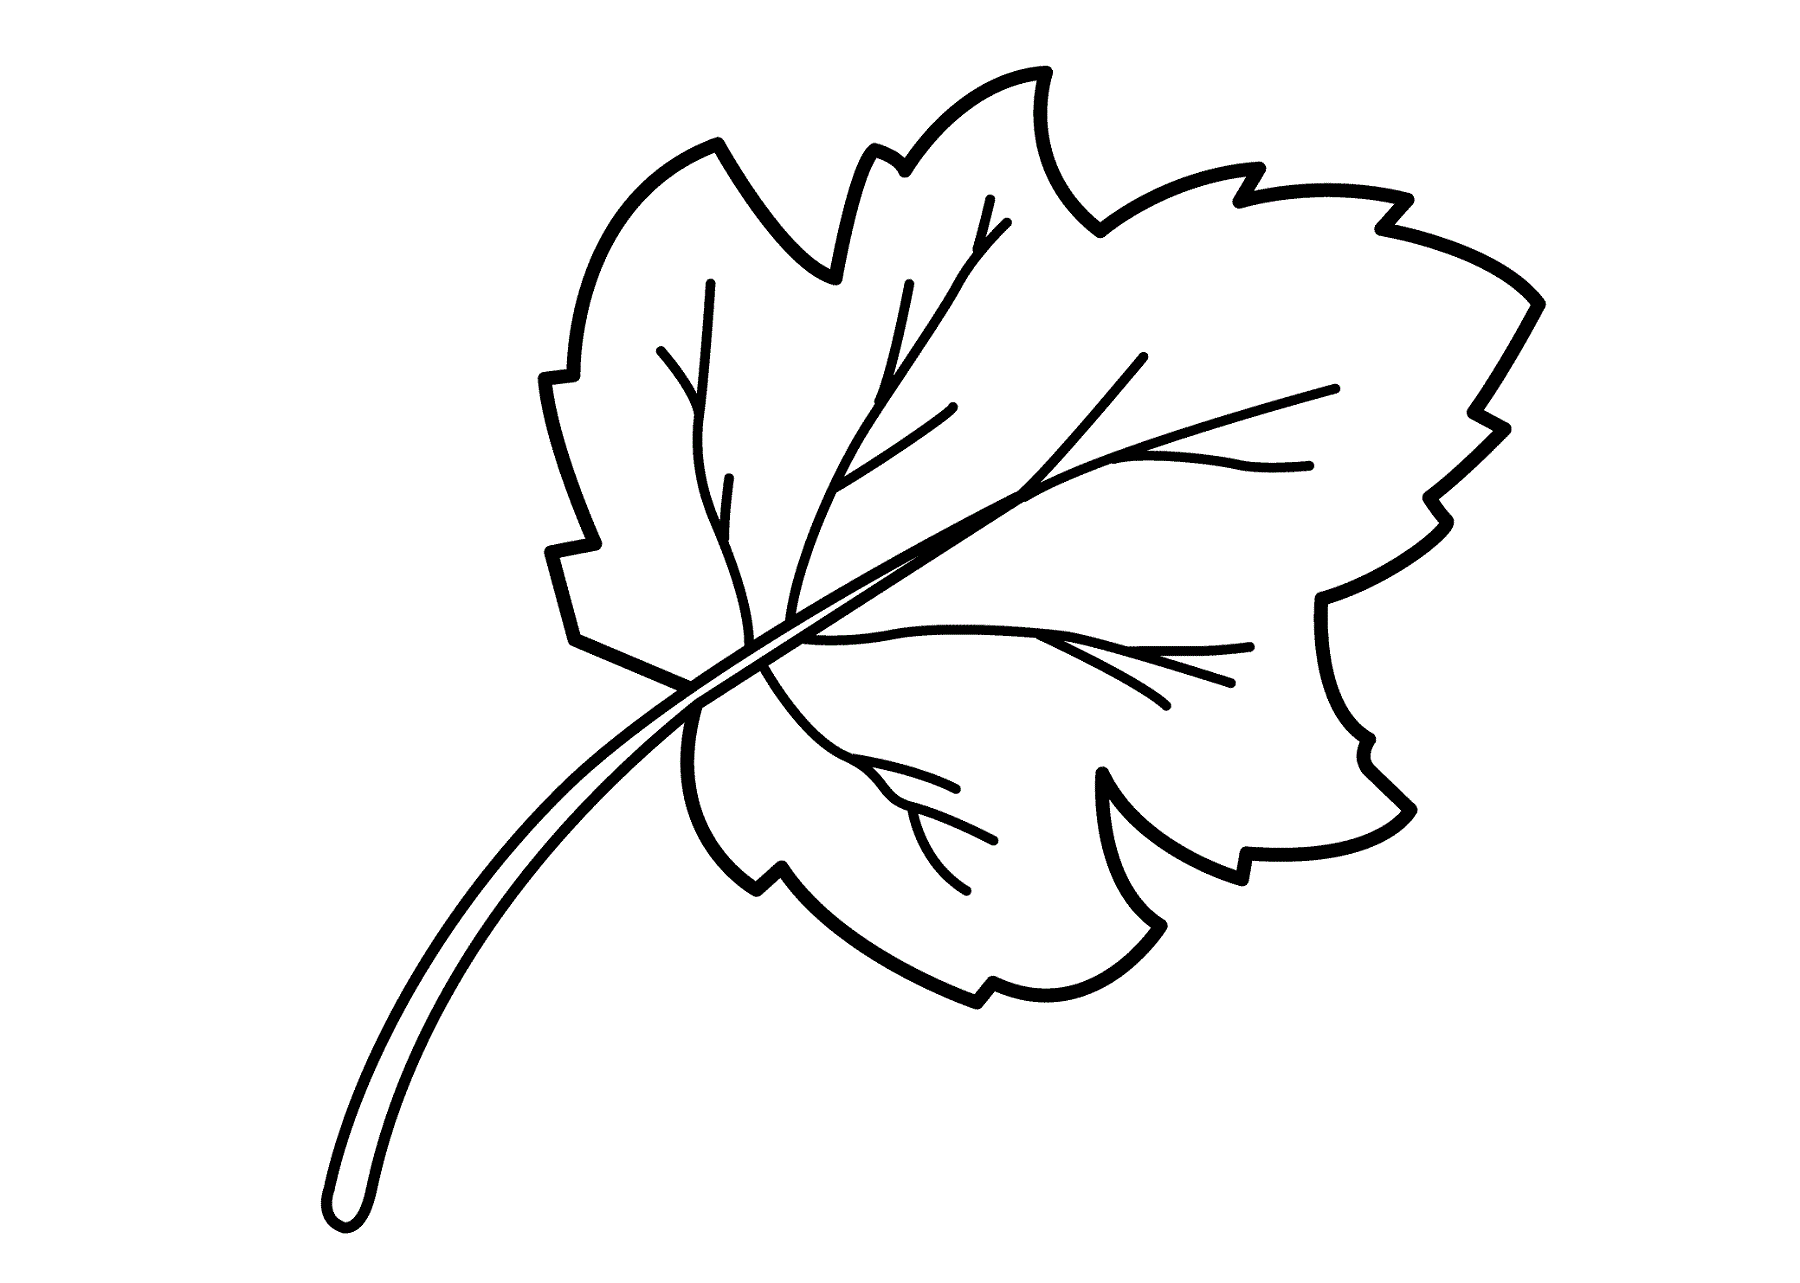 Leaf Colouring Pages Free